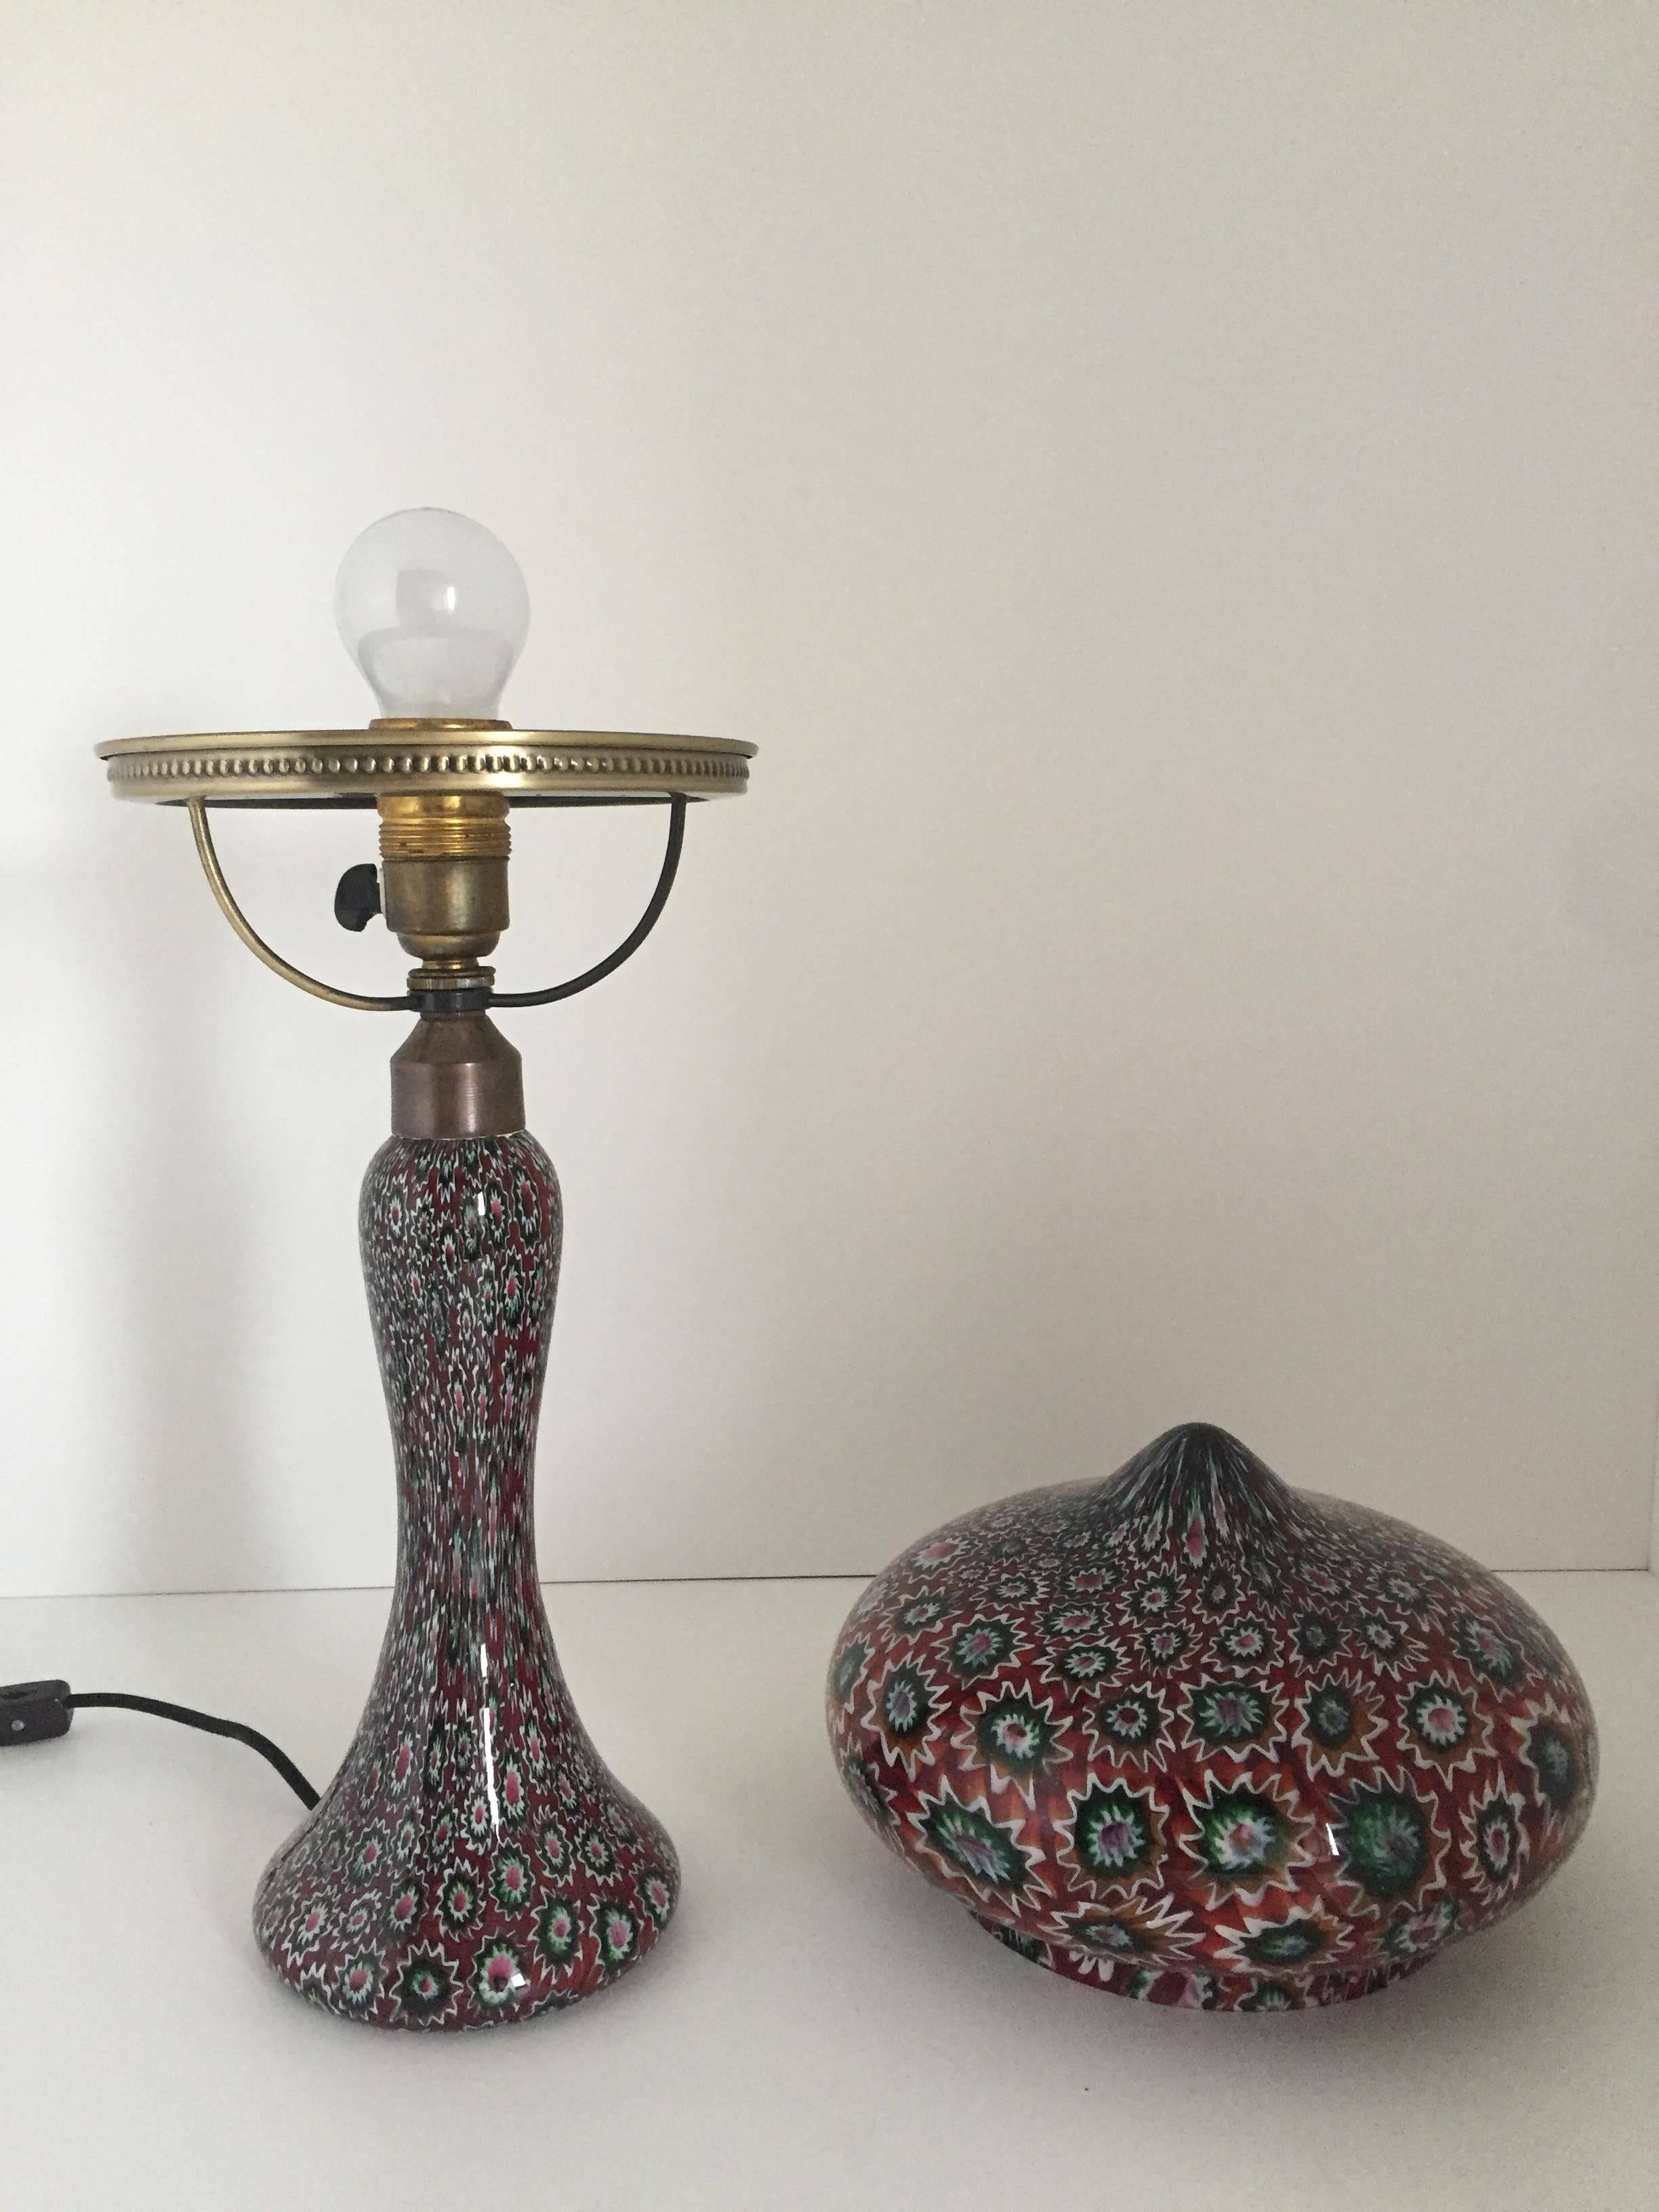 A rare and tall Italian Murano Fratelli Toso Millefiori lamp made, circa 1925. The lamp is in a pristine condition with new wired cords and without any cracks, chips or defects. Measures: The height is 51cm and the diameter of the shade is 23cm.